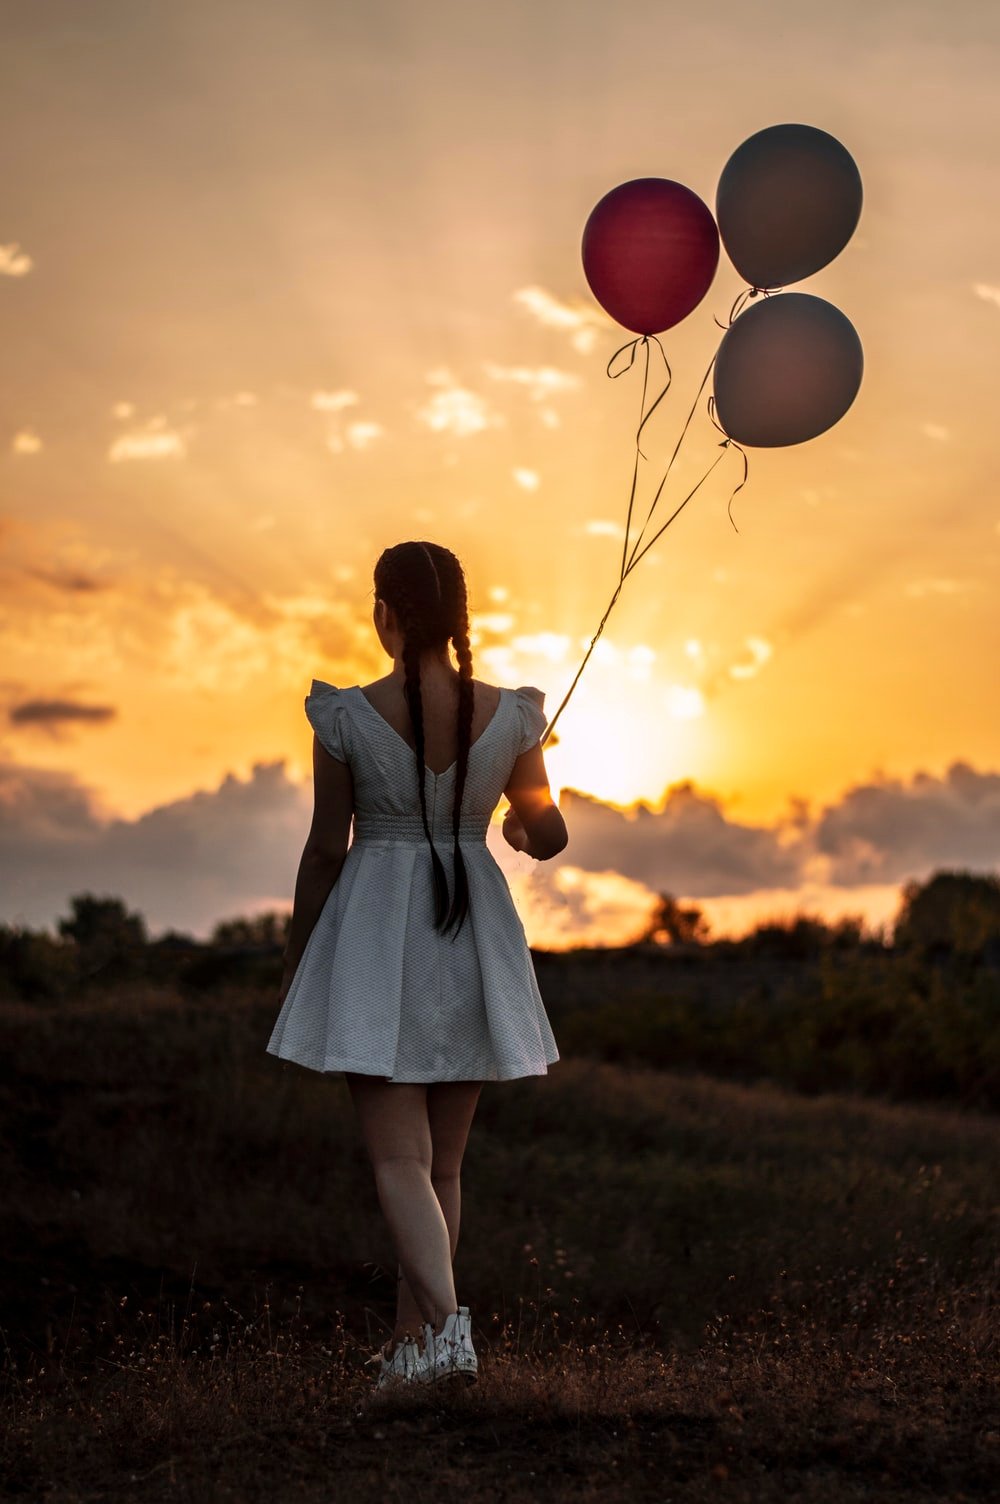 Balloon Girl Picture. Download Free Image